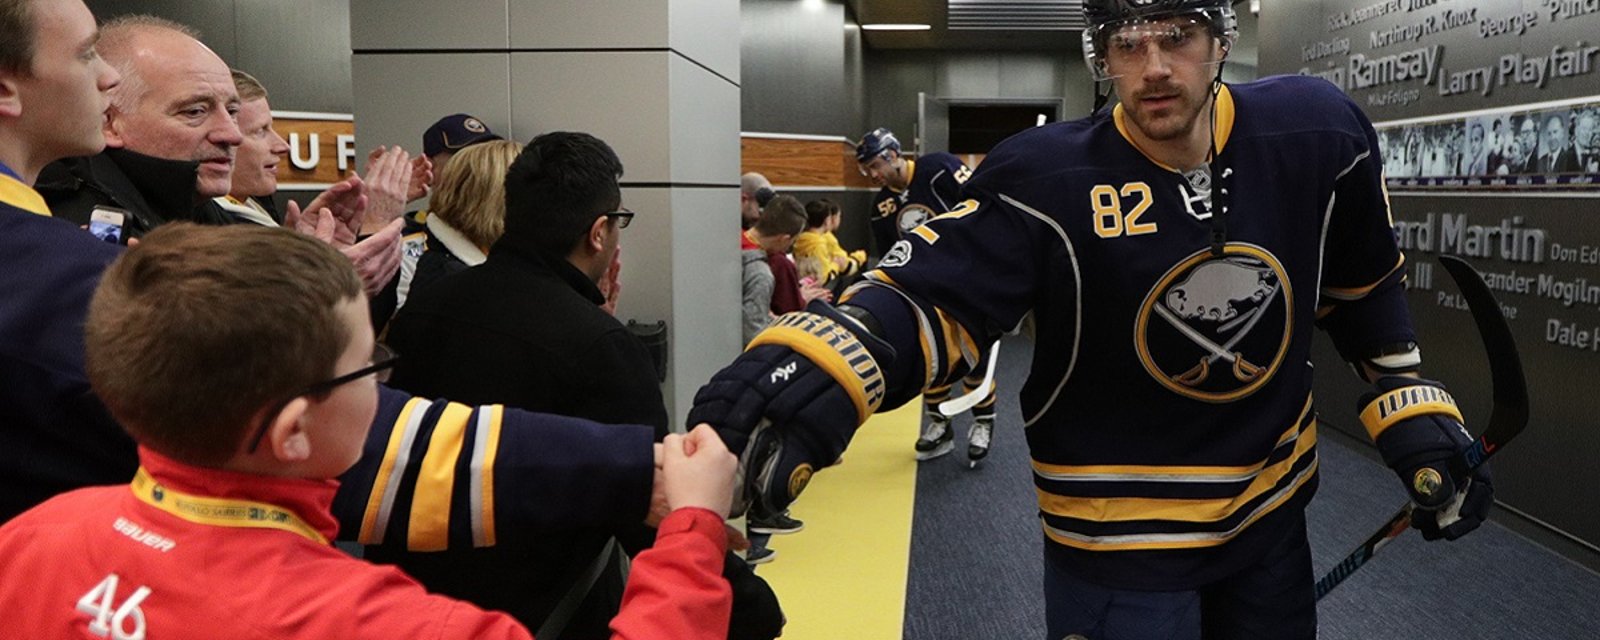 Braking: Huge update on Marcus Foligno contract negotiations from Floigno himself!